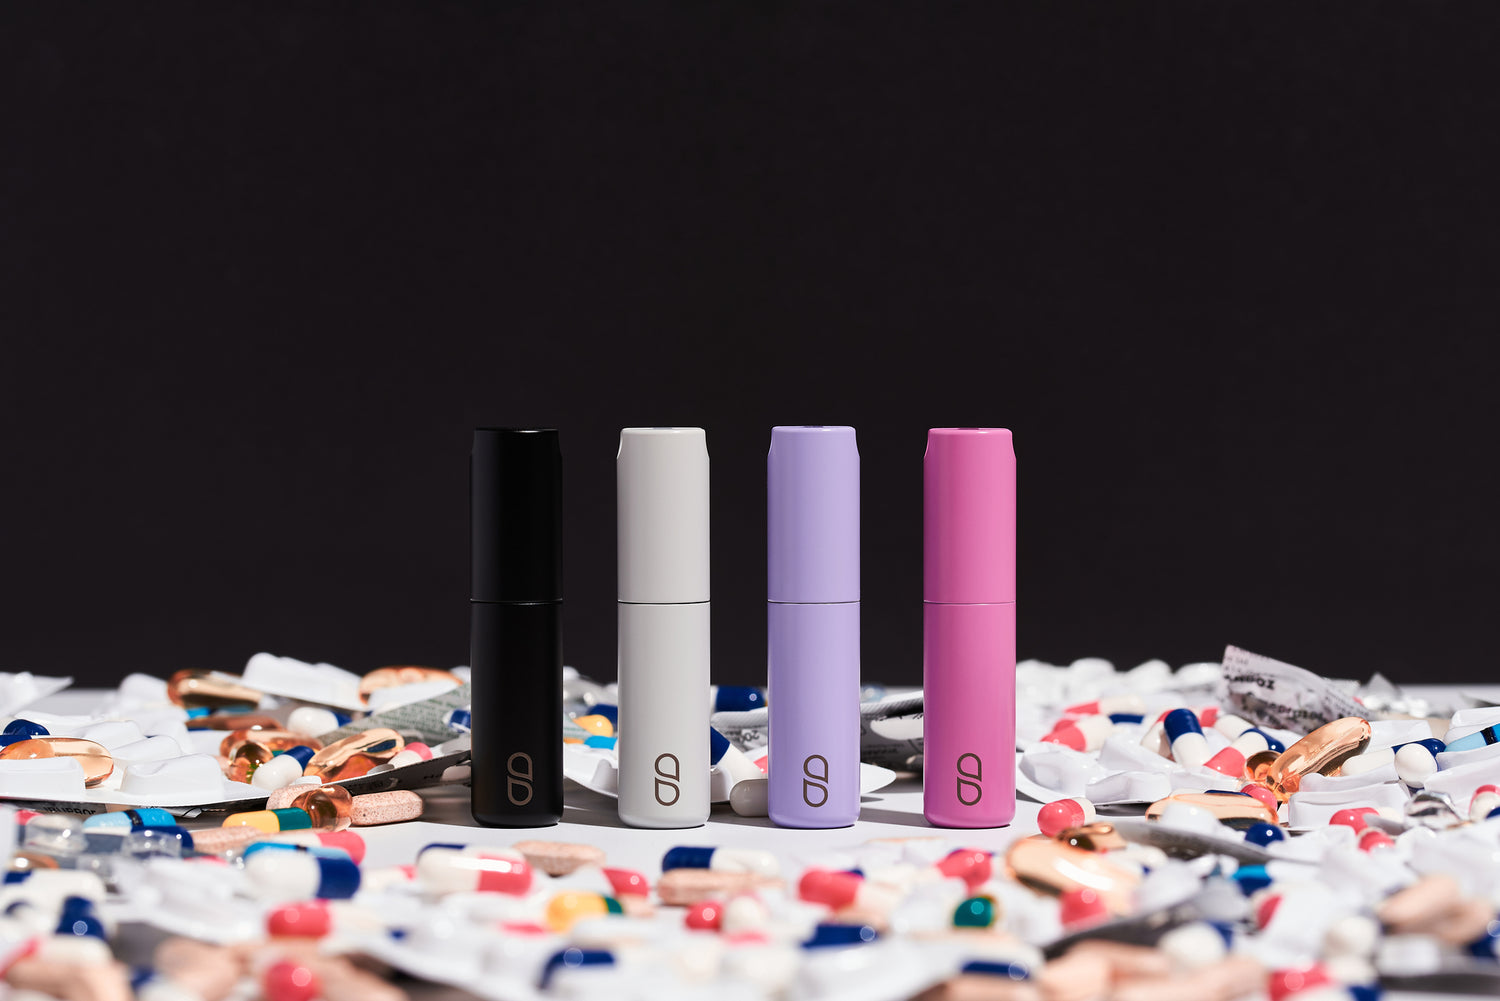 At Tabuu, we've designed a case of any occasion. Holding up to six pills, in a stylish, elegant and discrete case that's happy wherever you take it. Available in four colours: Jet Black, Cosmic Grey, Lavender and Flamingo Pink. Sustainable.